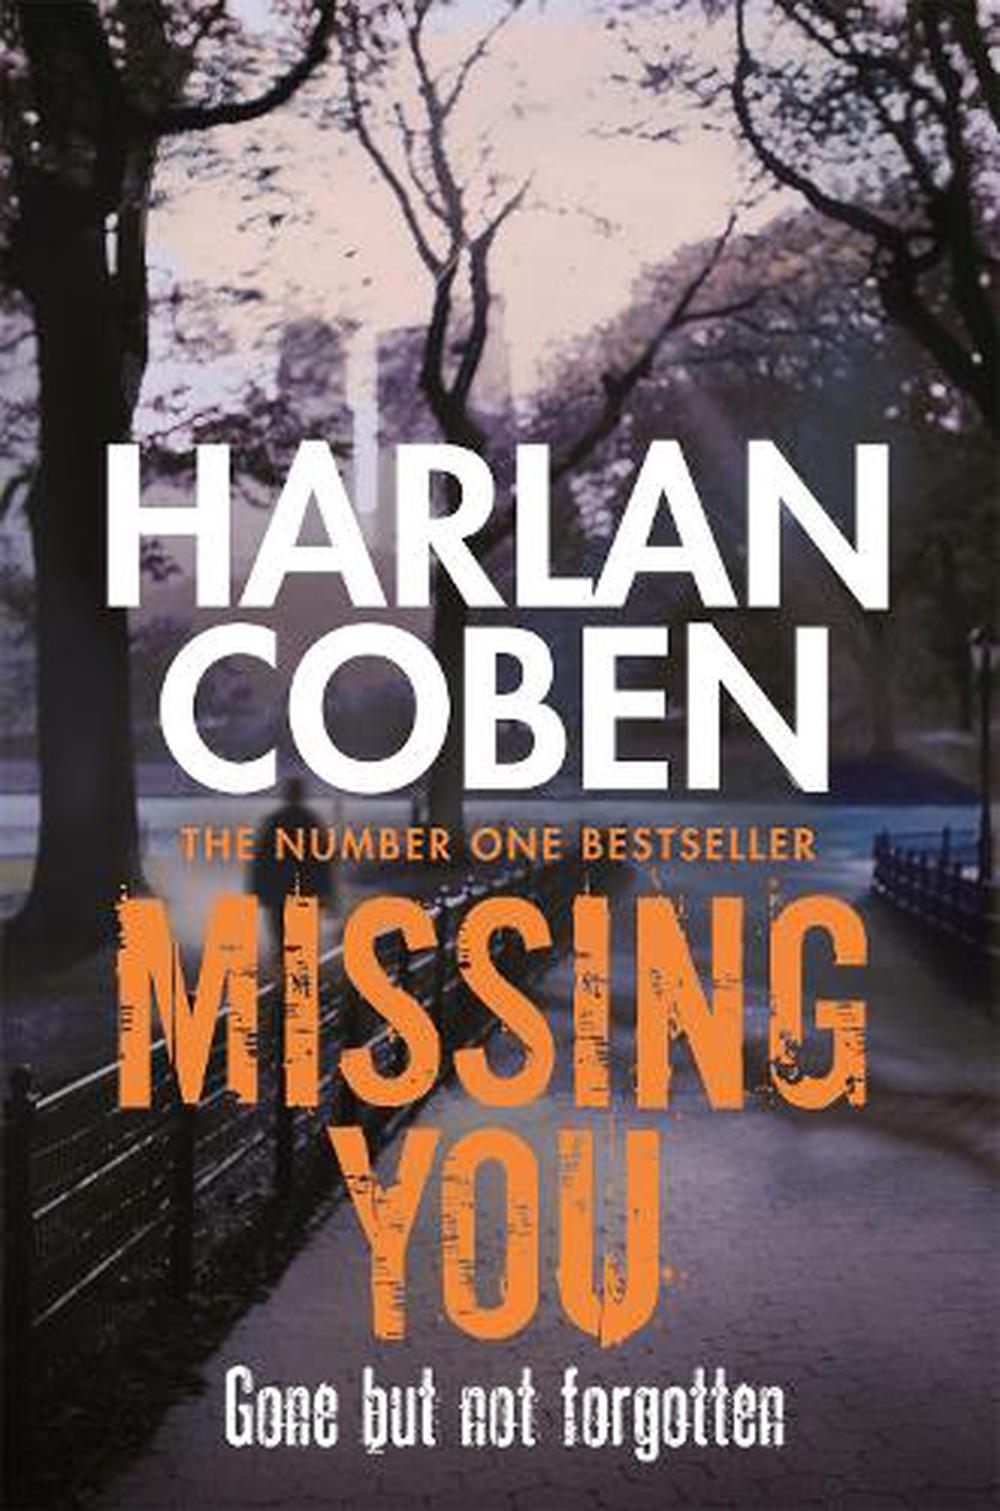 missing you by harlan coben summary